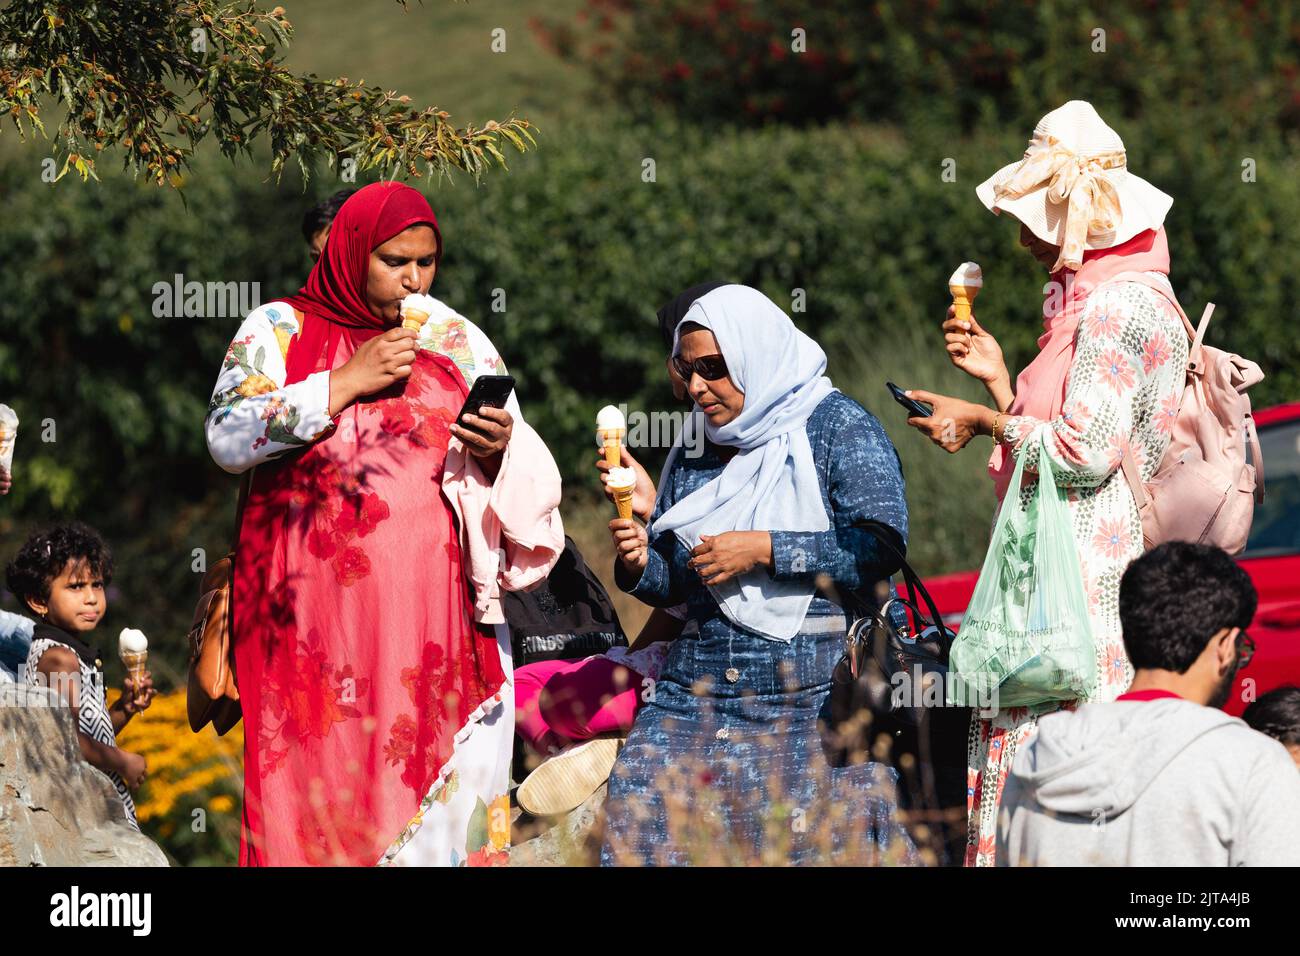 Muslim women in traditional dress om holiday earing ice cream at Lake Windermere Cumbria UK Stock Photo